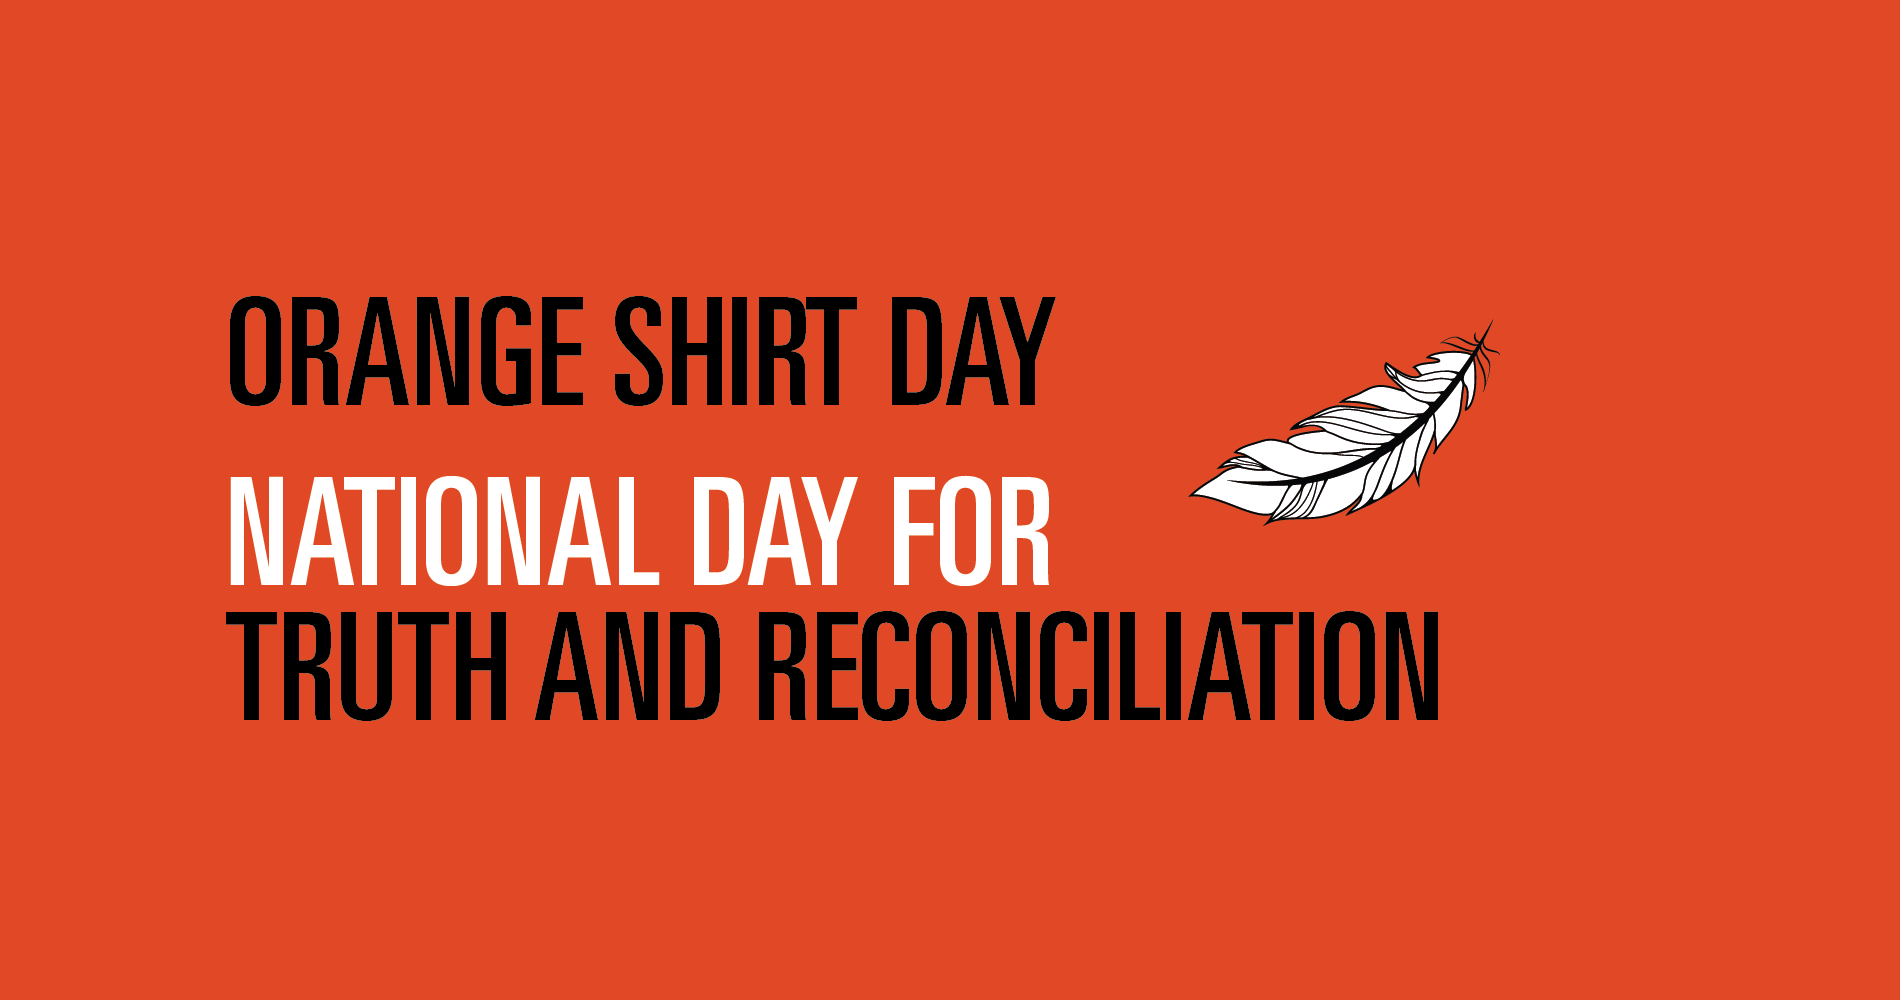 orange shirt day and national day for truth and reconciliation